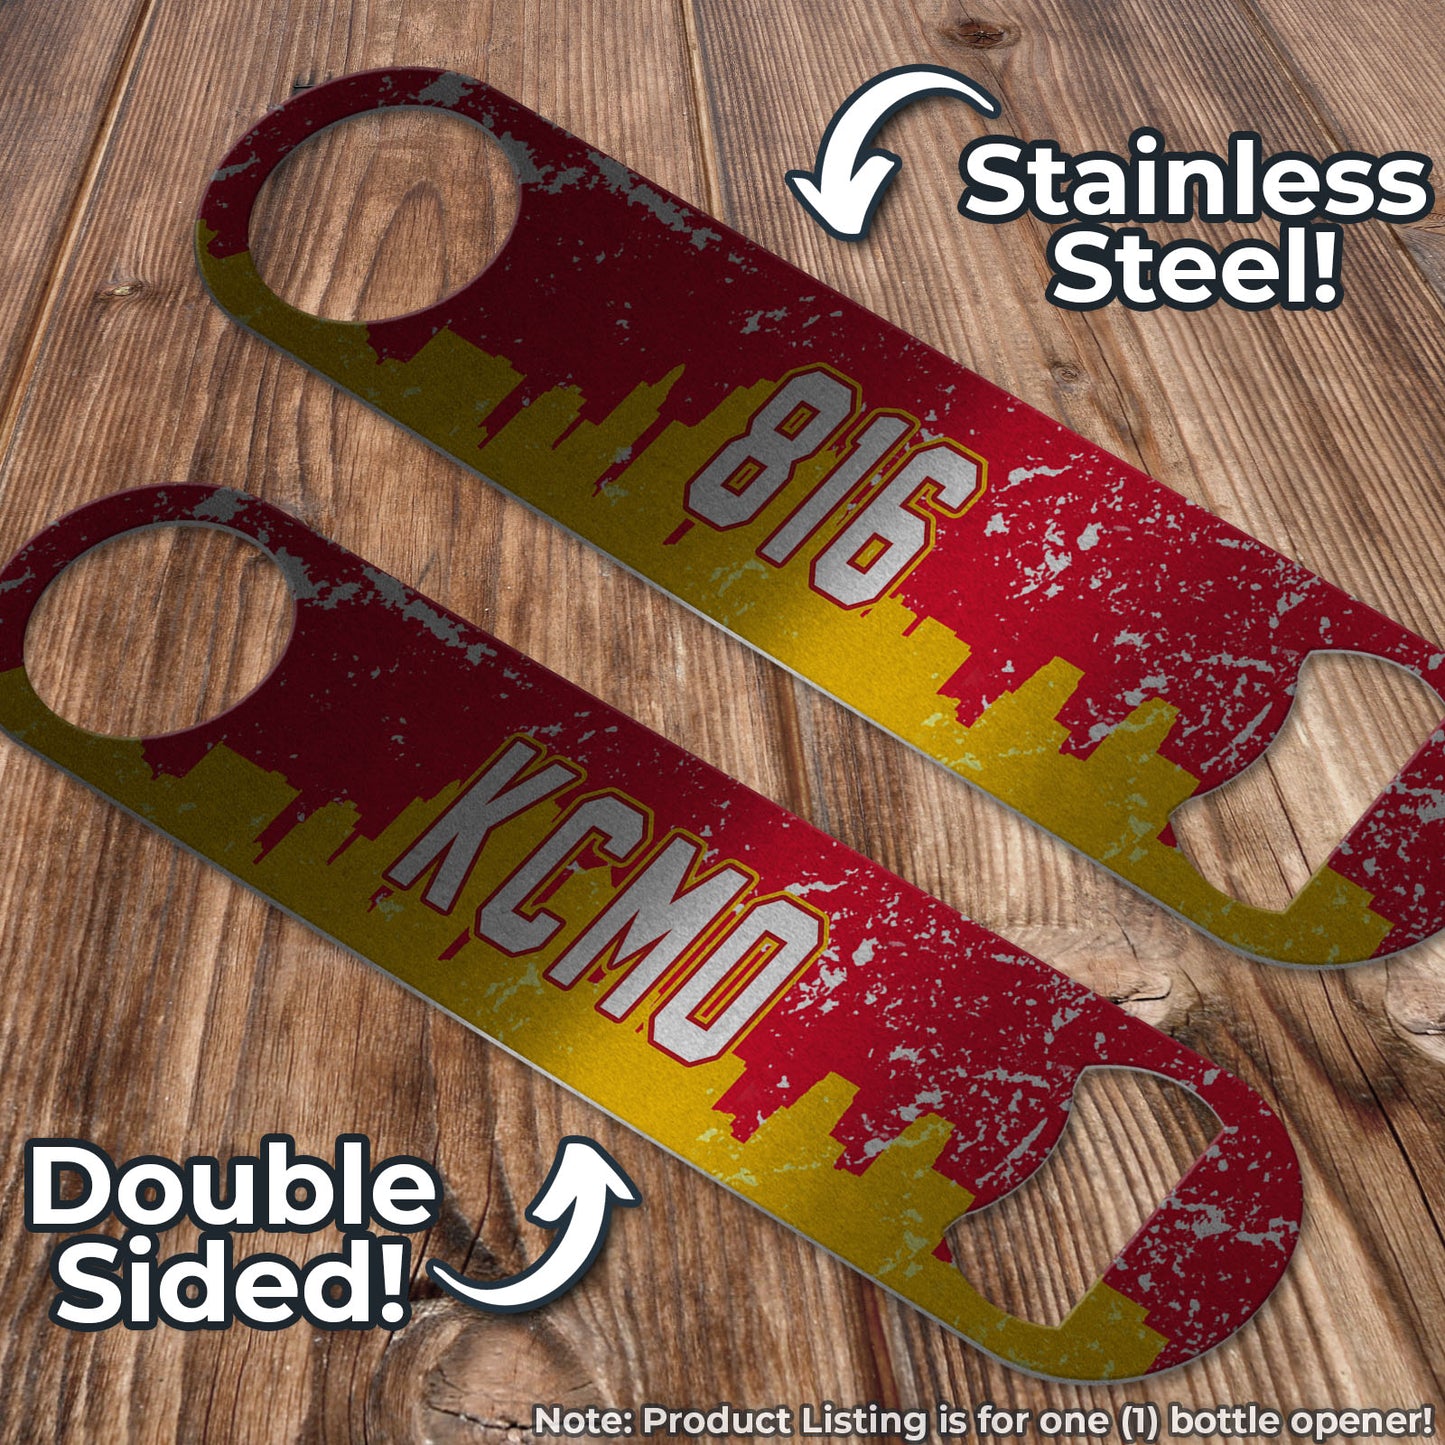 KCMO 816 Distressed Yellow and Red SKYLINE Football Themed Pub Style Stainless Steel Bottle Opener